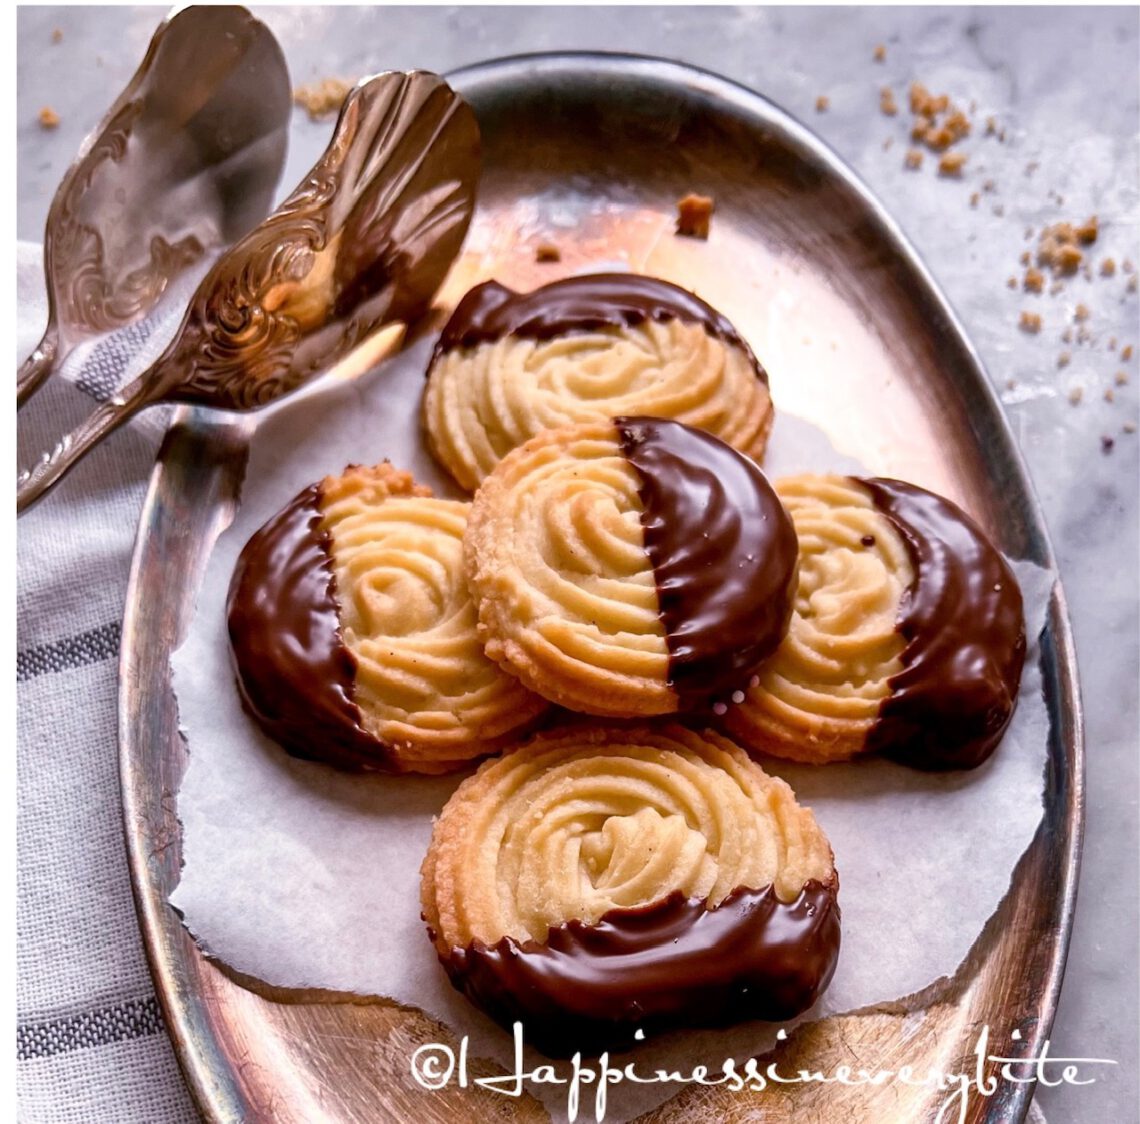 Buttery viennese whirls